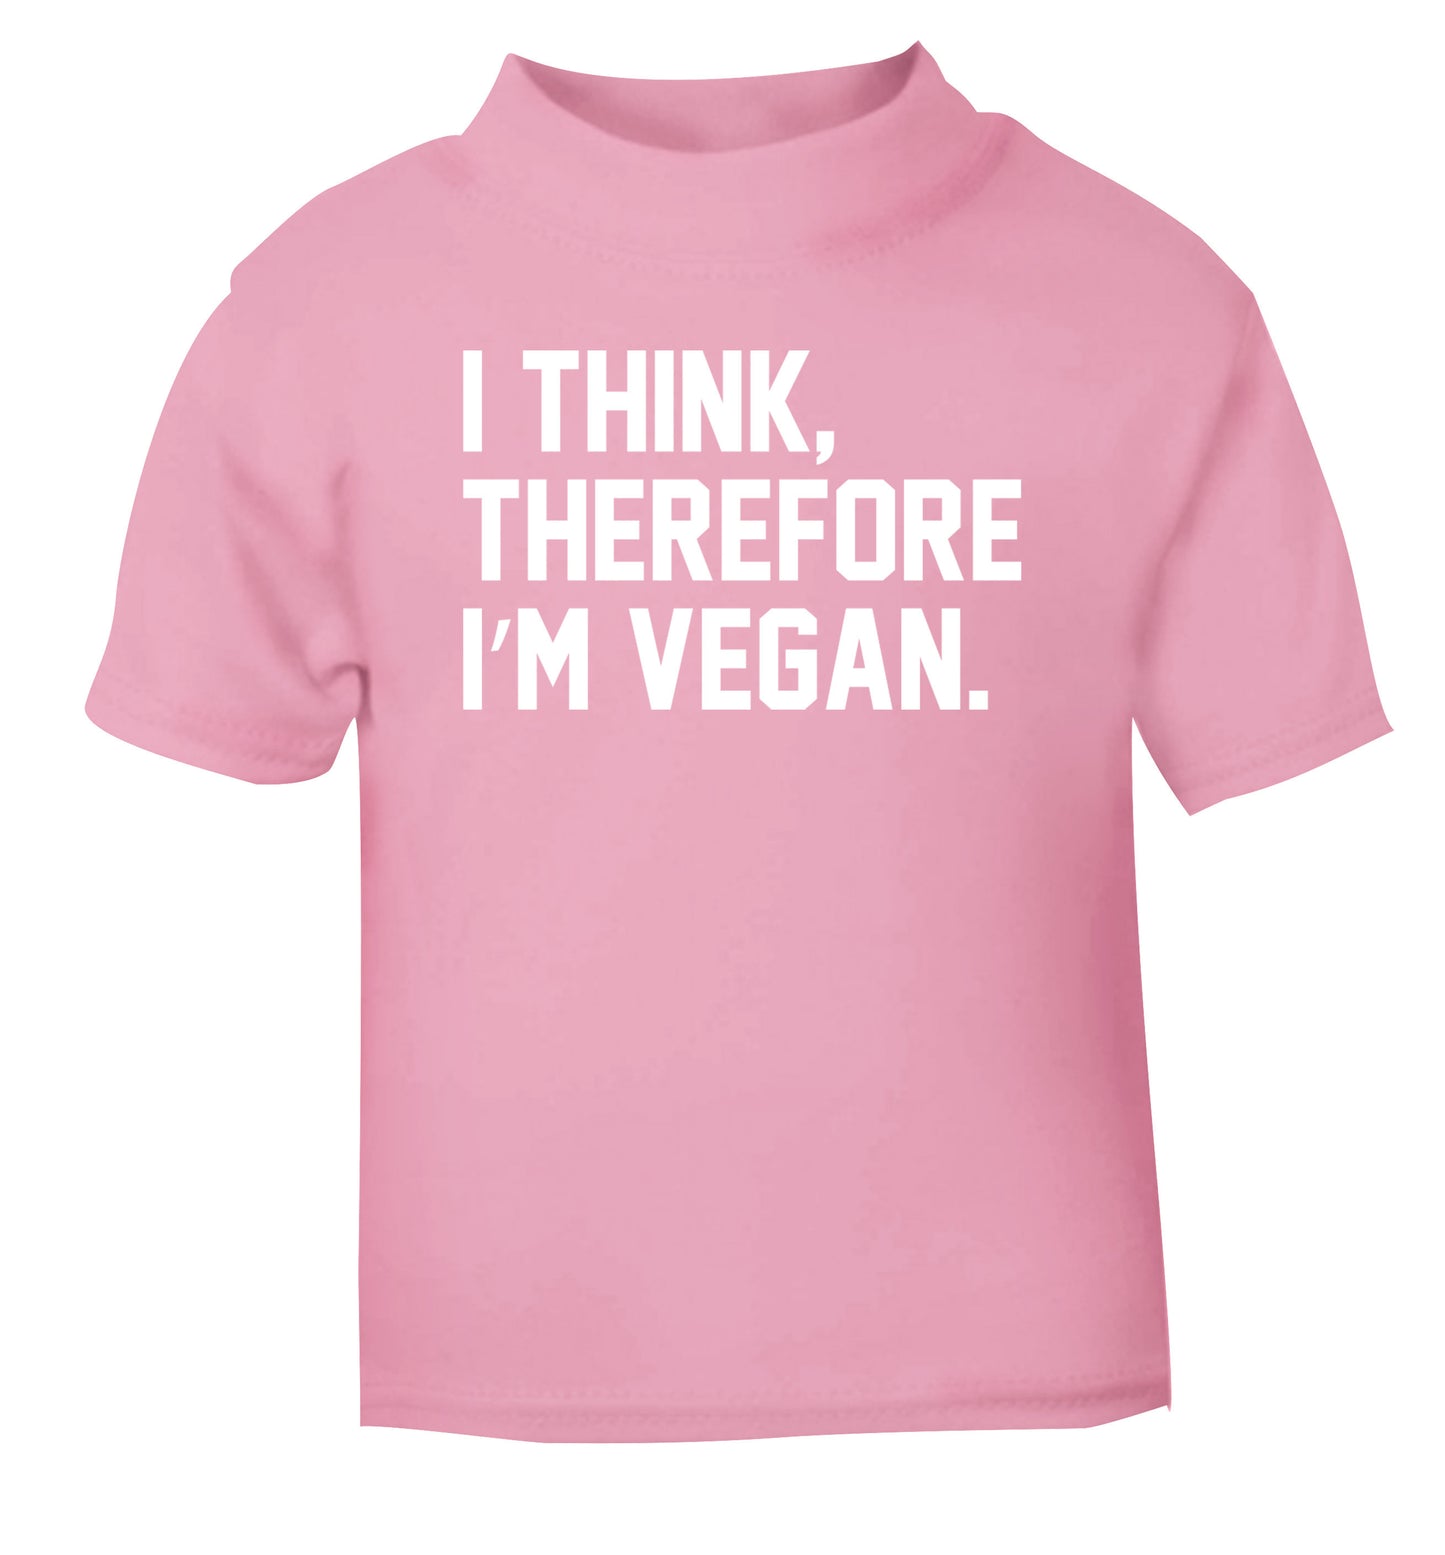 I think therefore I'm vegan light pink Baby Toddler Tshirt 2 Years